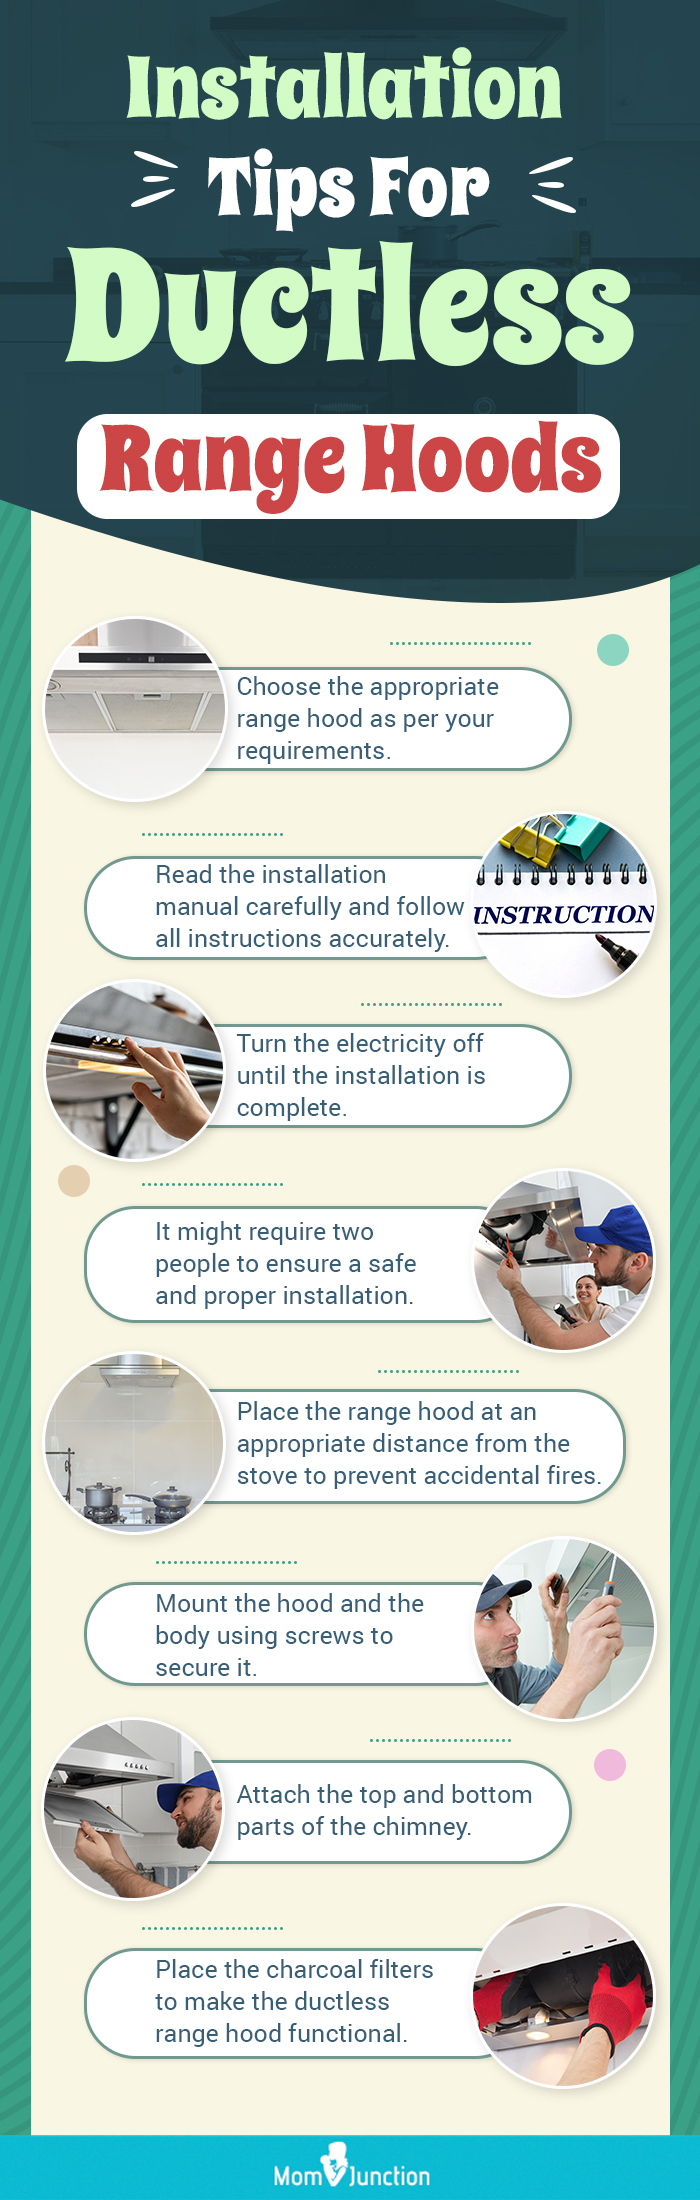 Installation Tips For Ductless Range Hoods (infographic)